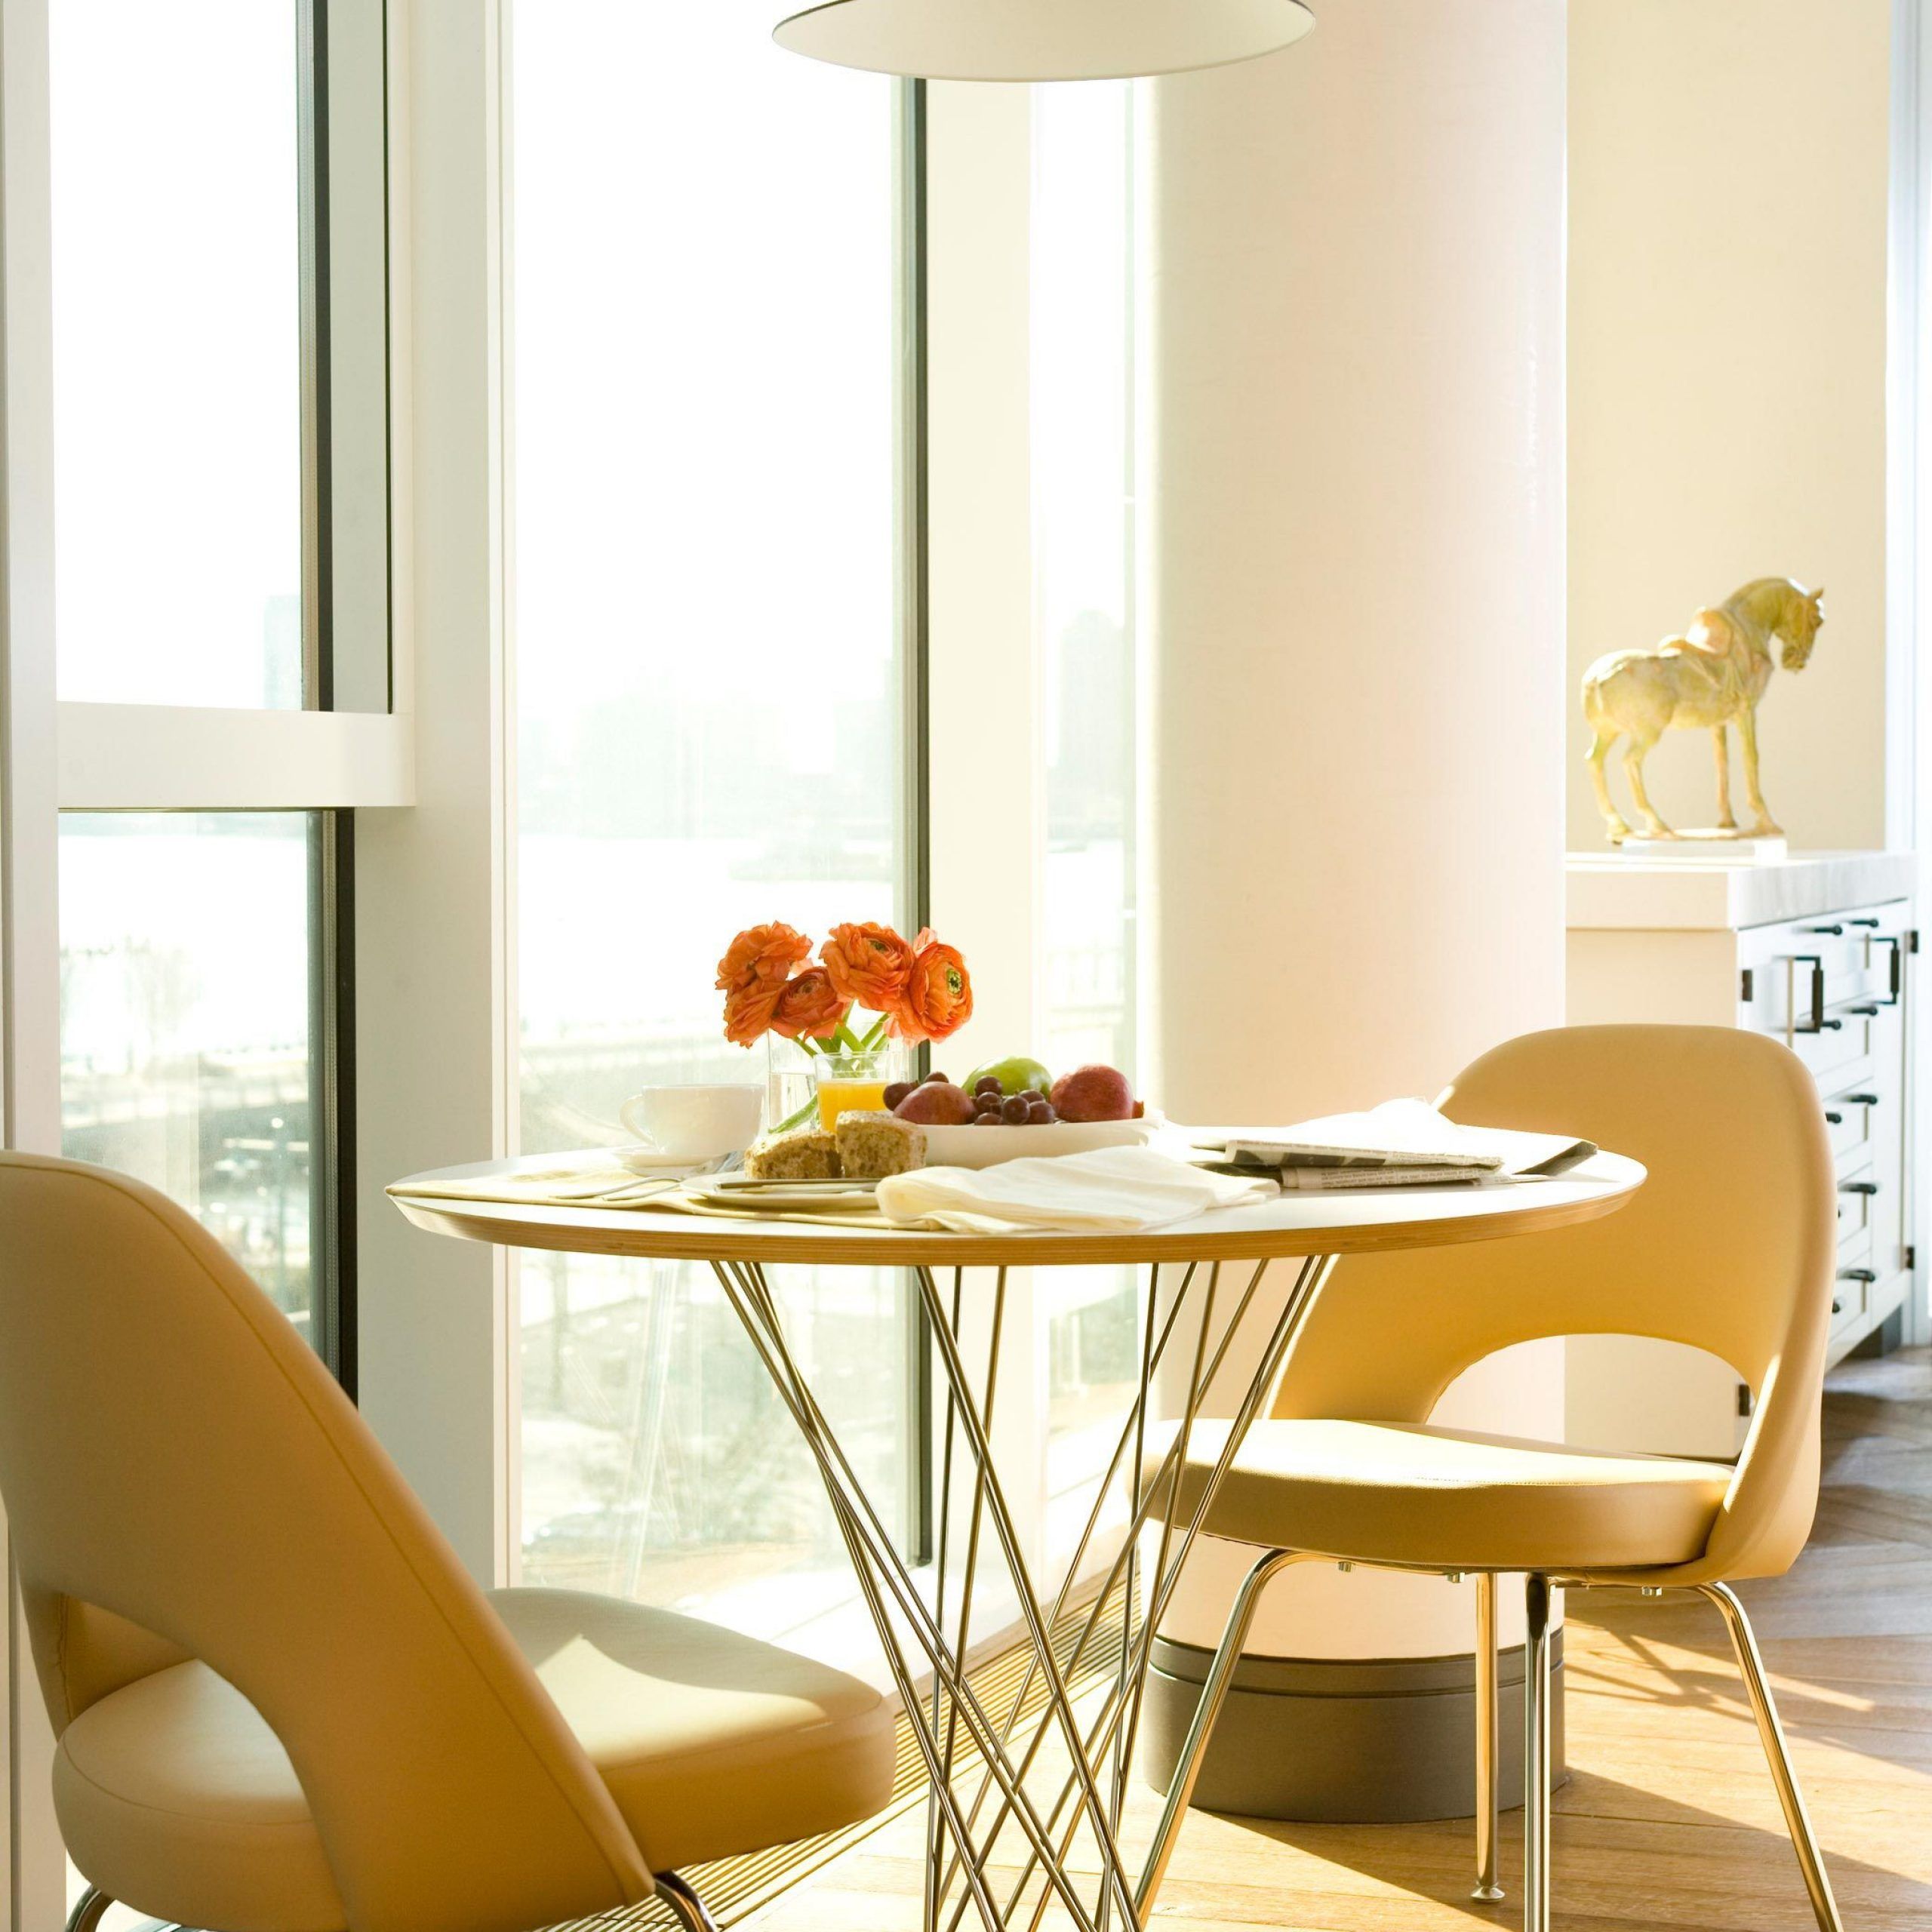 Saarinen Executive Armless Chair With Tubular Legs In 2020 | Dining Within Armless Round Dining Sets (View 15 of 15)